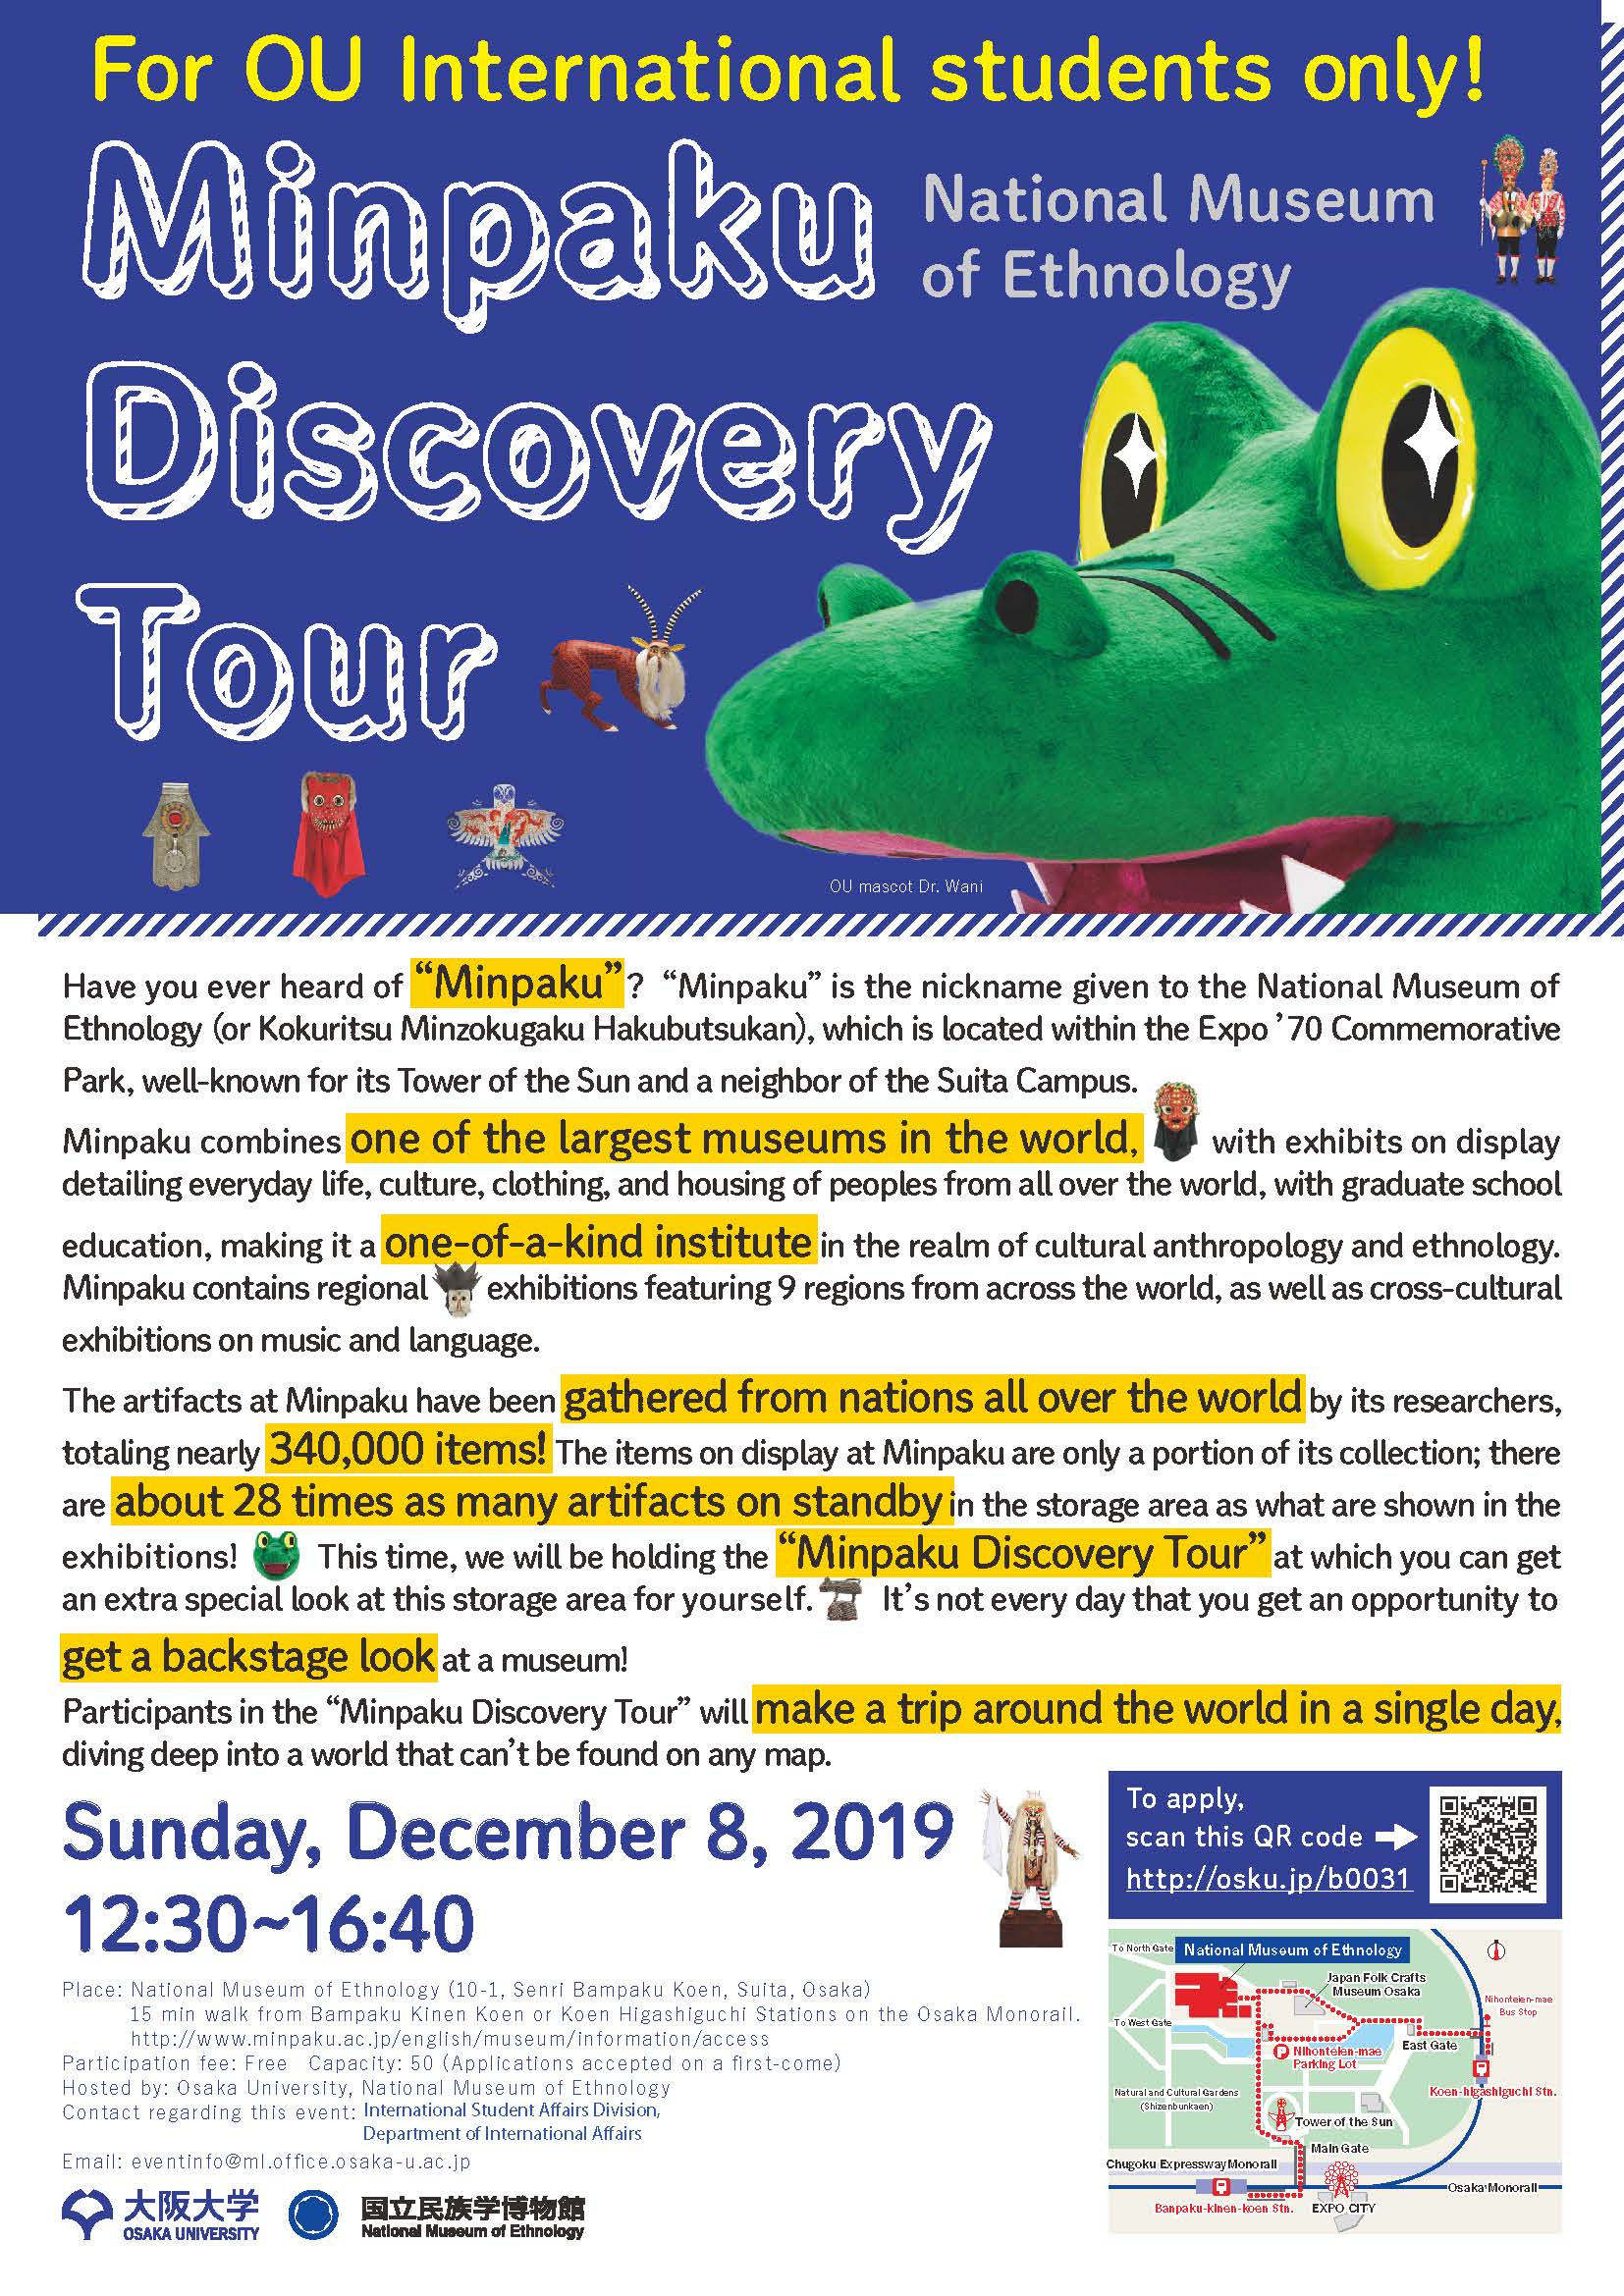 Only For OU International Students! Minpaku Discovery Tour